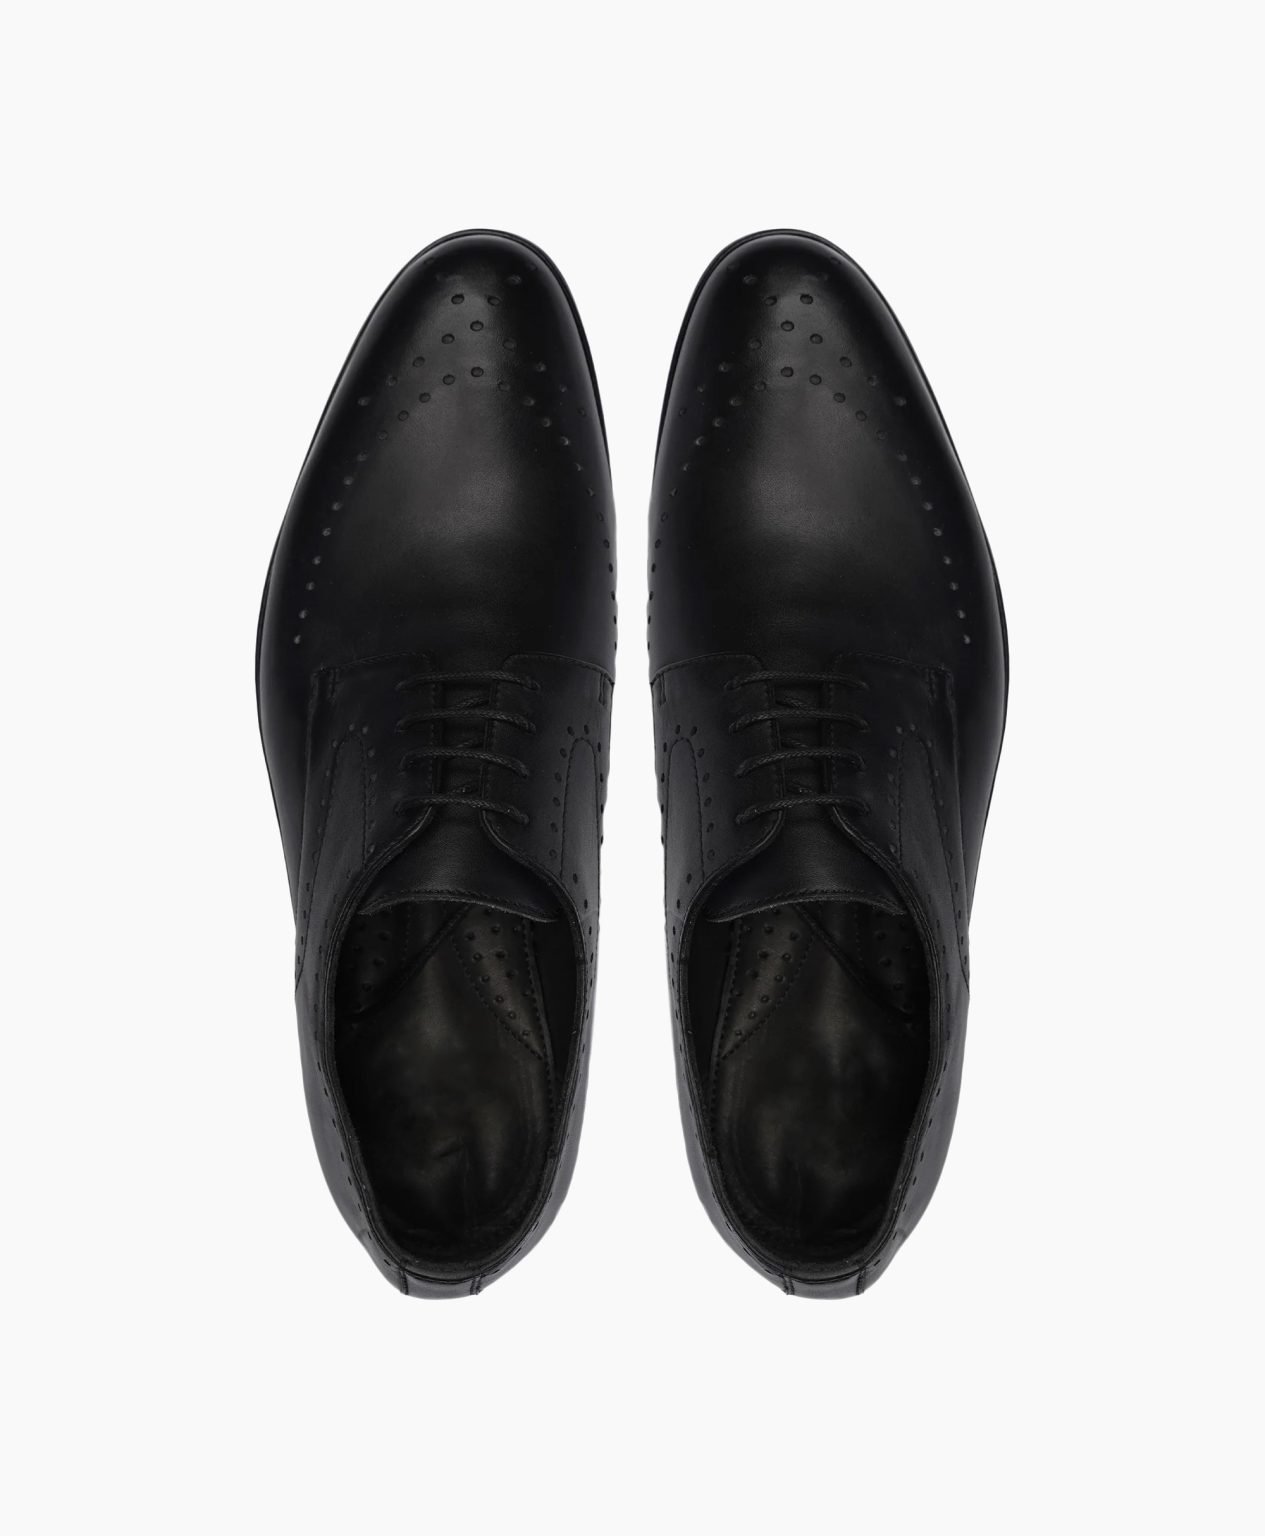 matlock-derby-black-leather-shoes-image202